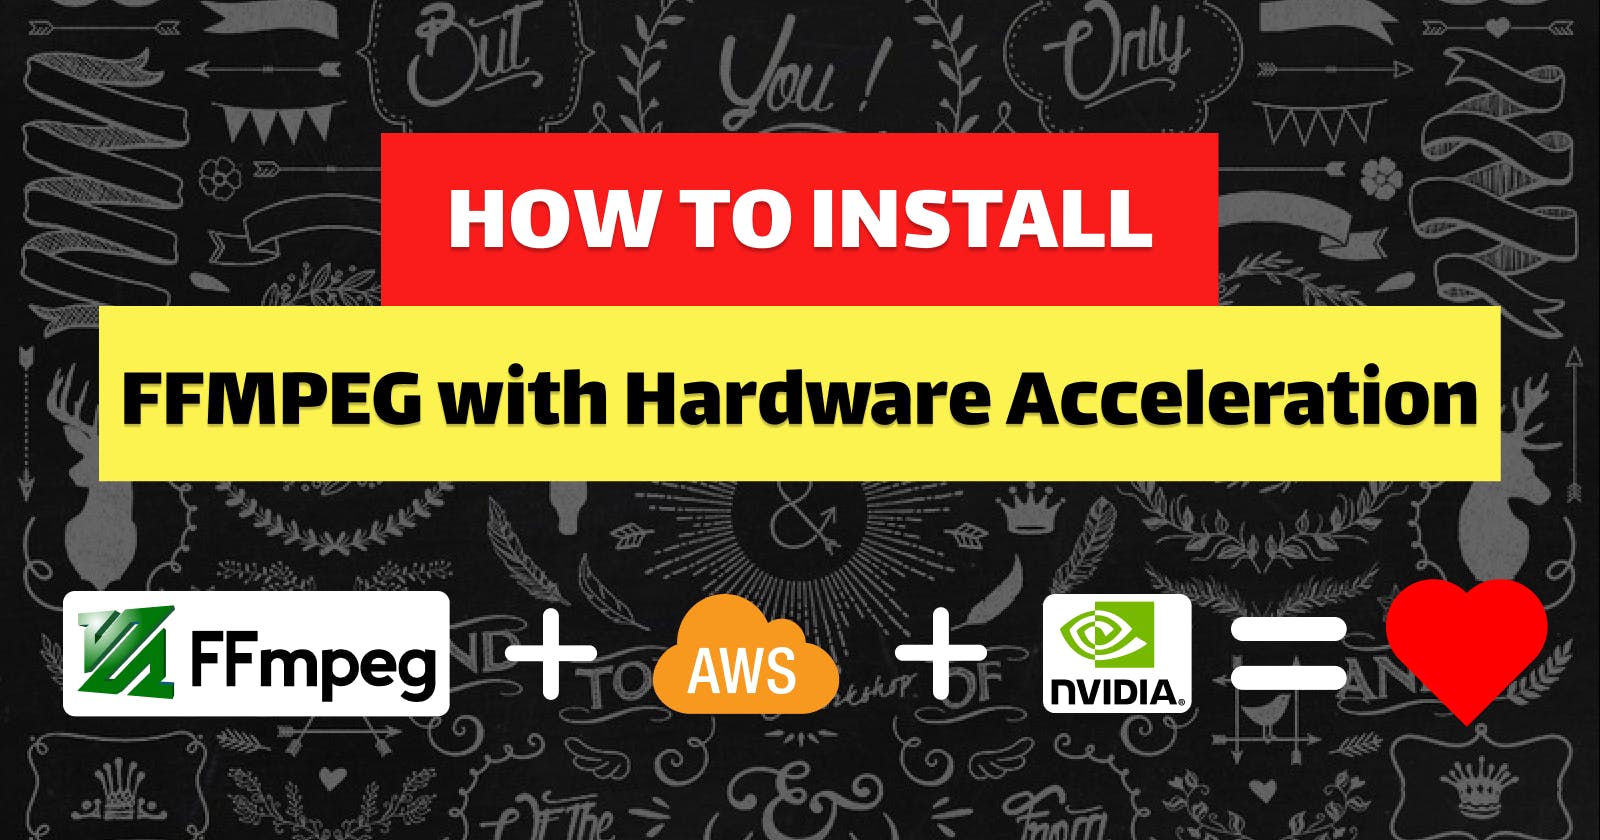 How to install FFmpeg with Harware Accelaration on AWS